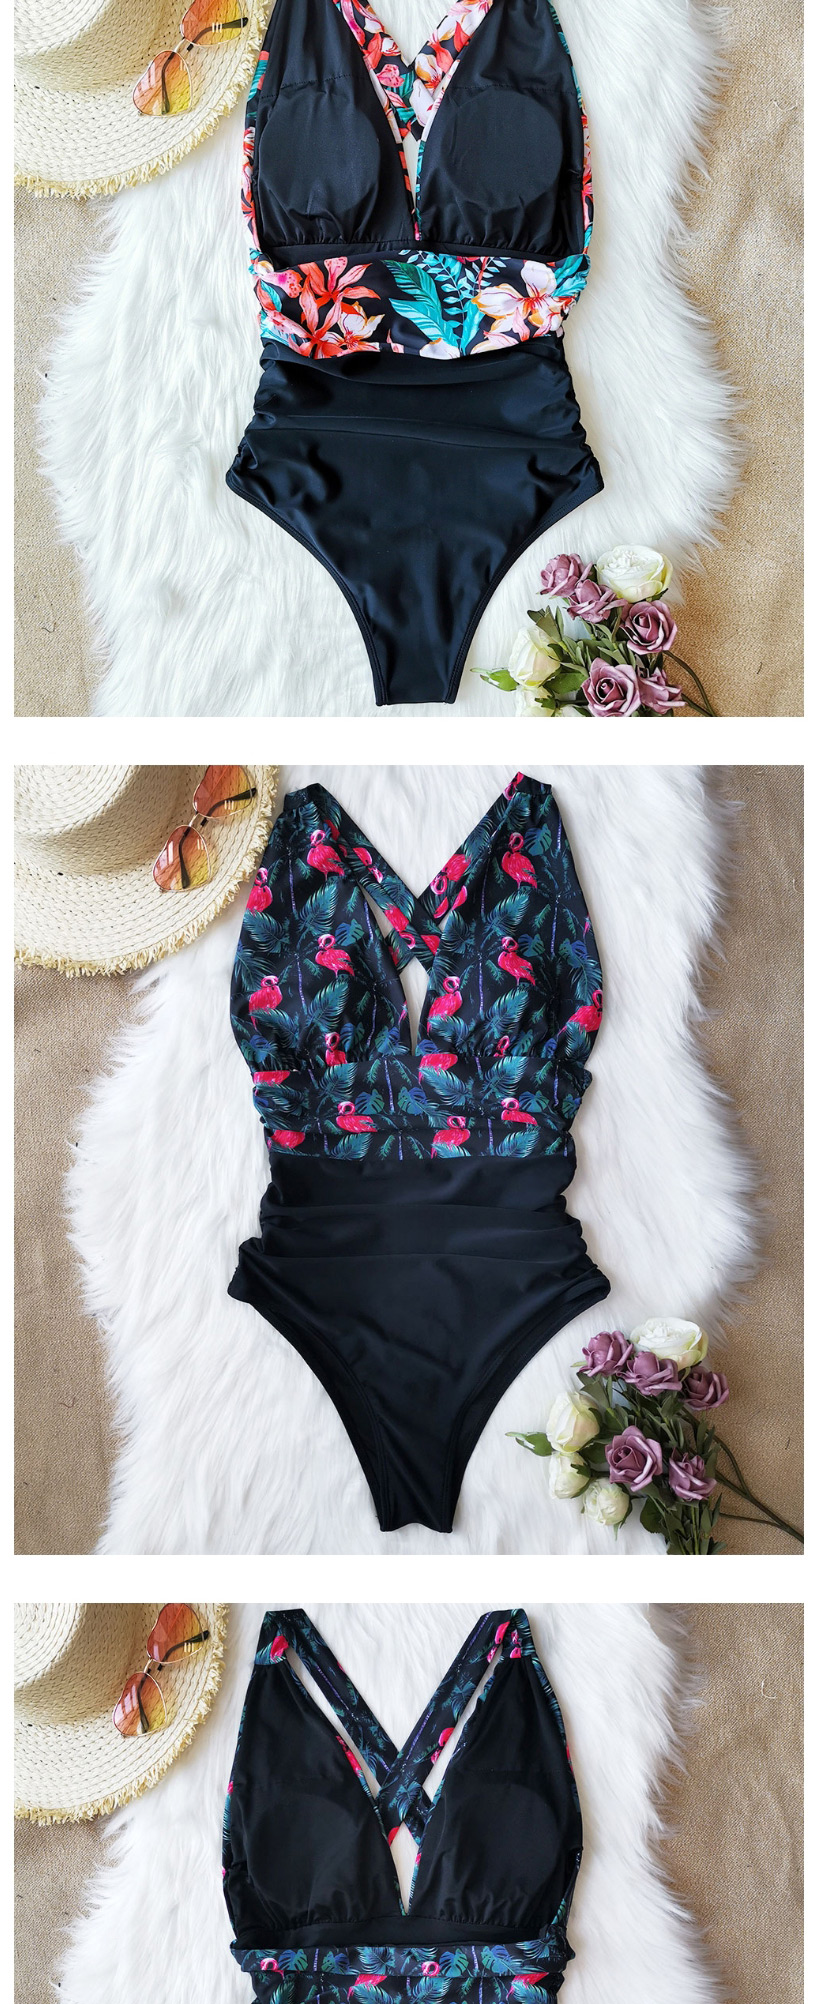 Fashion Black + Black Orange Flower (in Replenishment) Printed Pleated Leaky Triangle One-piece Swimsuit,One Pieces